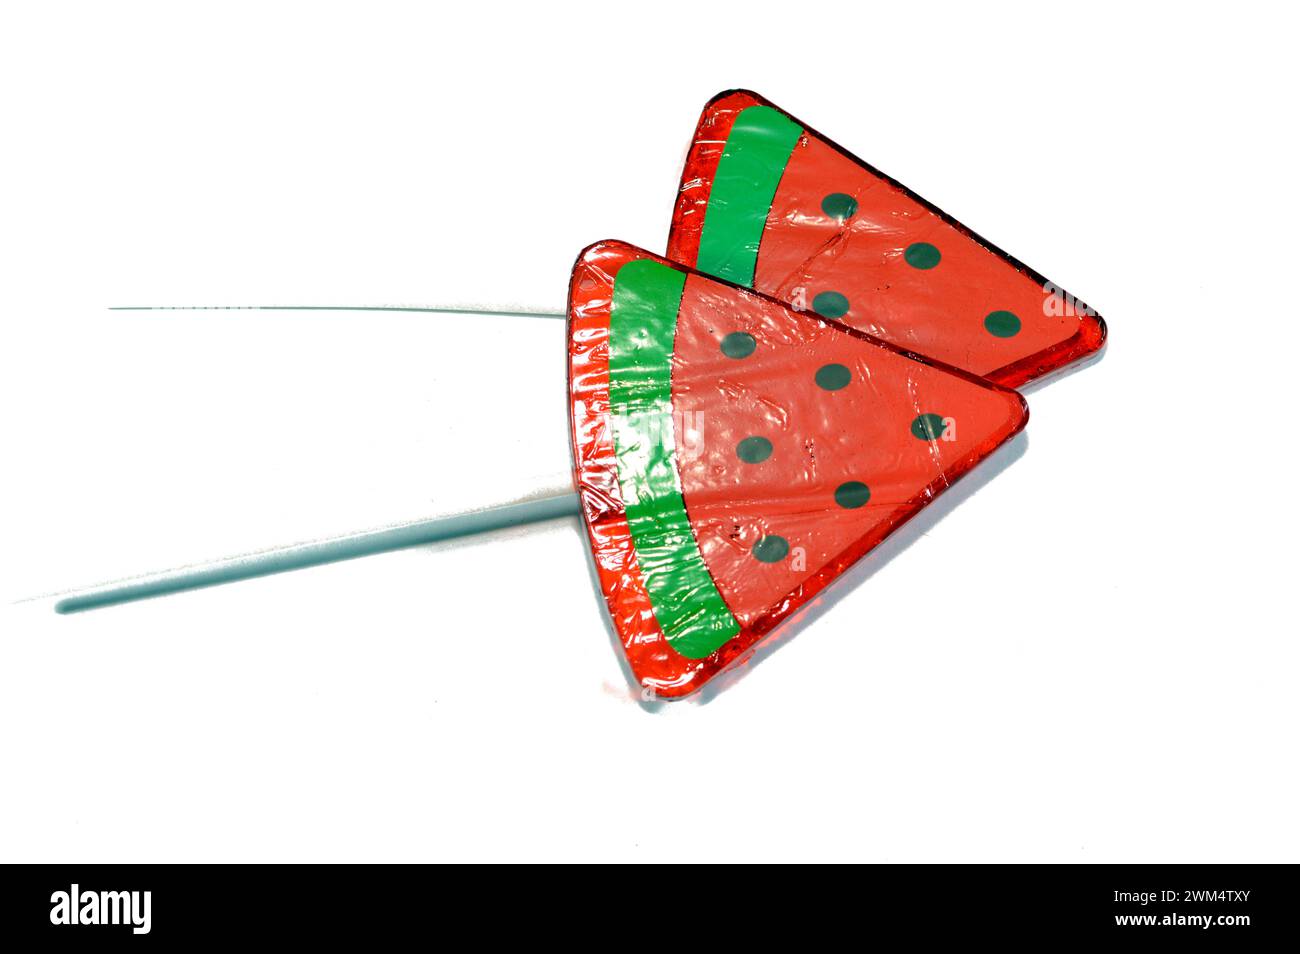 Watermelon flavored lollipop, a type of sugar candy usually consisting of hard candy mounted on a stick and intended for sucking or licking, lolly, su Stock Photo